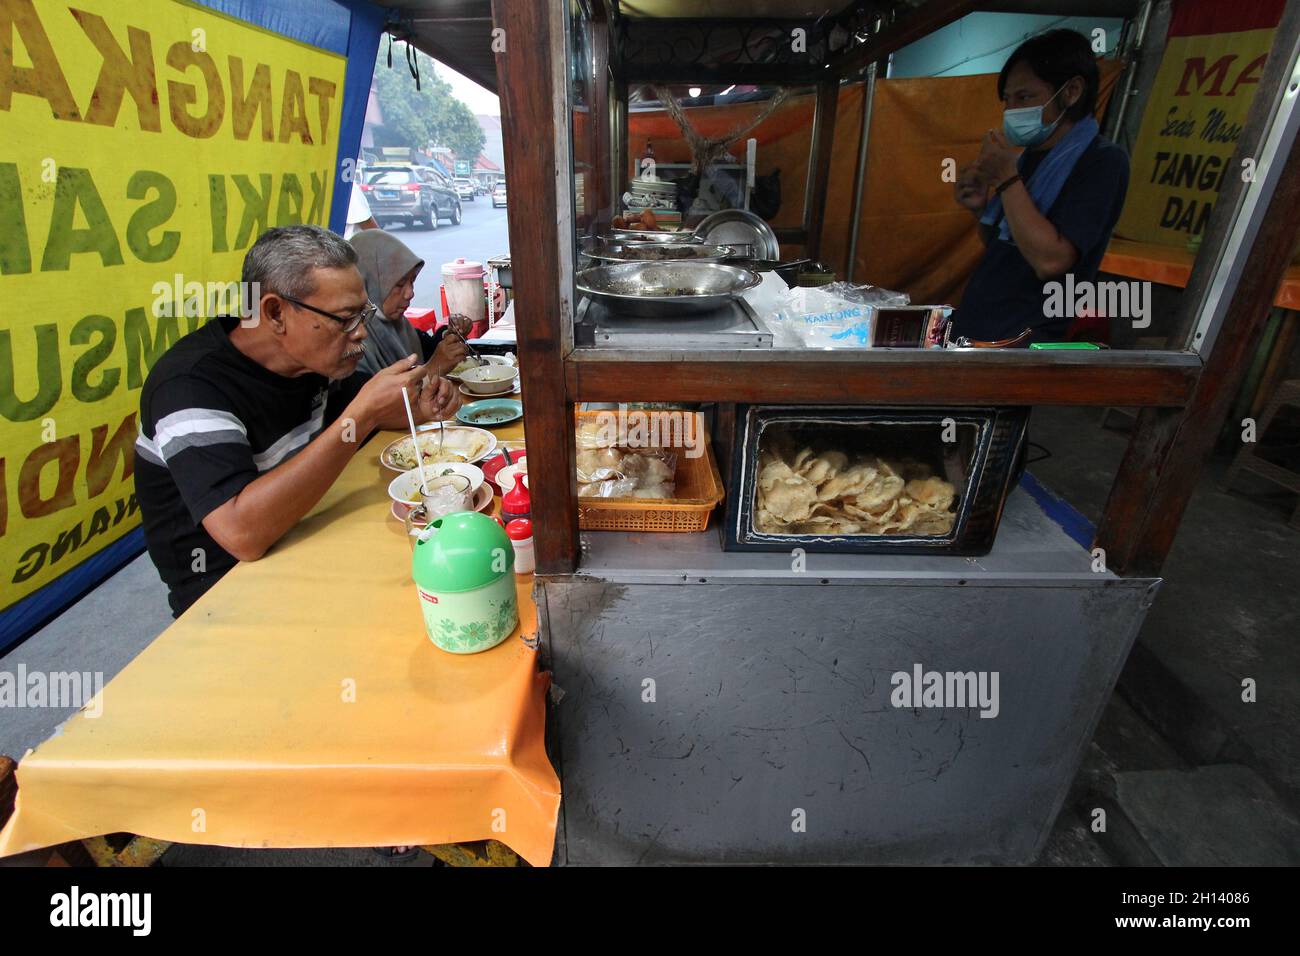 Karawang, Indonesia. 15th Oct, 2021. Consumers enjoy food at the Soto Tangkar Mang Endi stall, one of the legendary foods typical of Karawang on Jalan Dewi Sartika, West Karawang, Karawang, West Java, Indonesia. This soto dish uses beef ribs and beef leg veins seasoned with turmeric and chili. It tastes savory and slightly sweet. Interestingly, this delicious dish is cooked traditionally. Almost all ingredients are steamed in a pot over coals of firewood. The growth of micro, small and medium enterprises (MSMEs) economic actors in Indonesia has begun to stir in the midst of the Covid-19 pandem Stock Photo